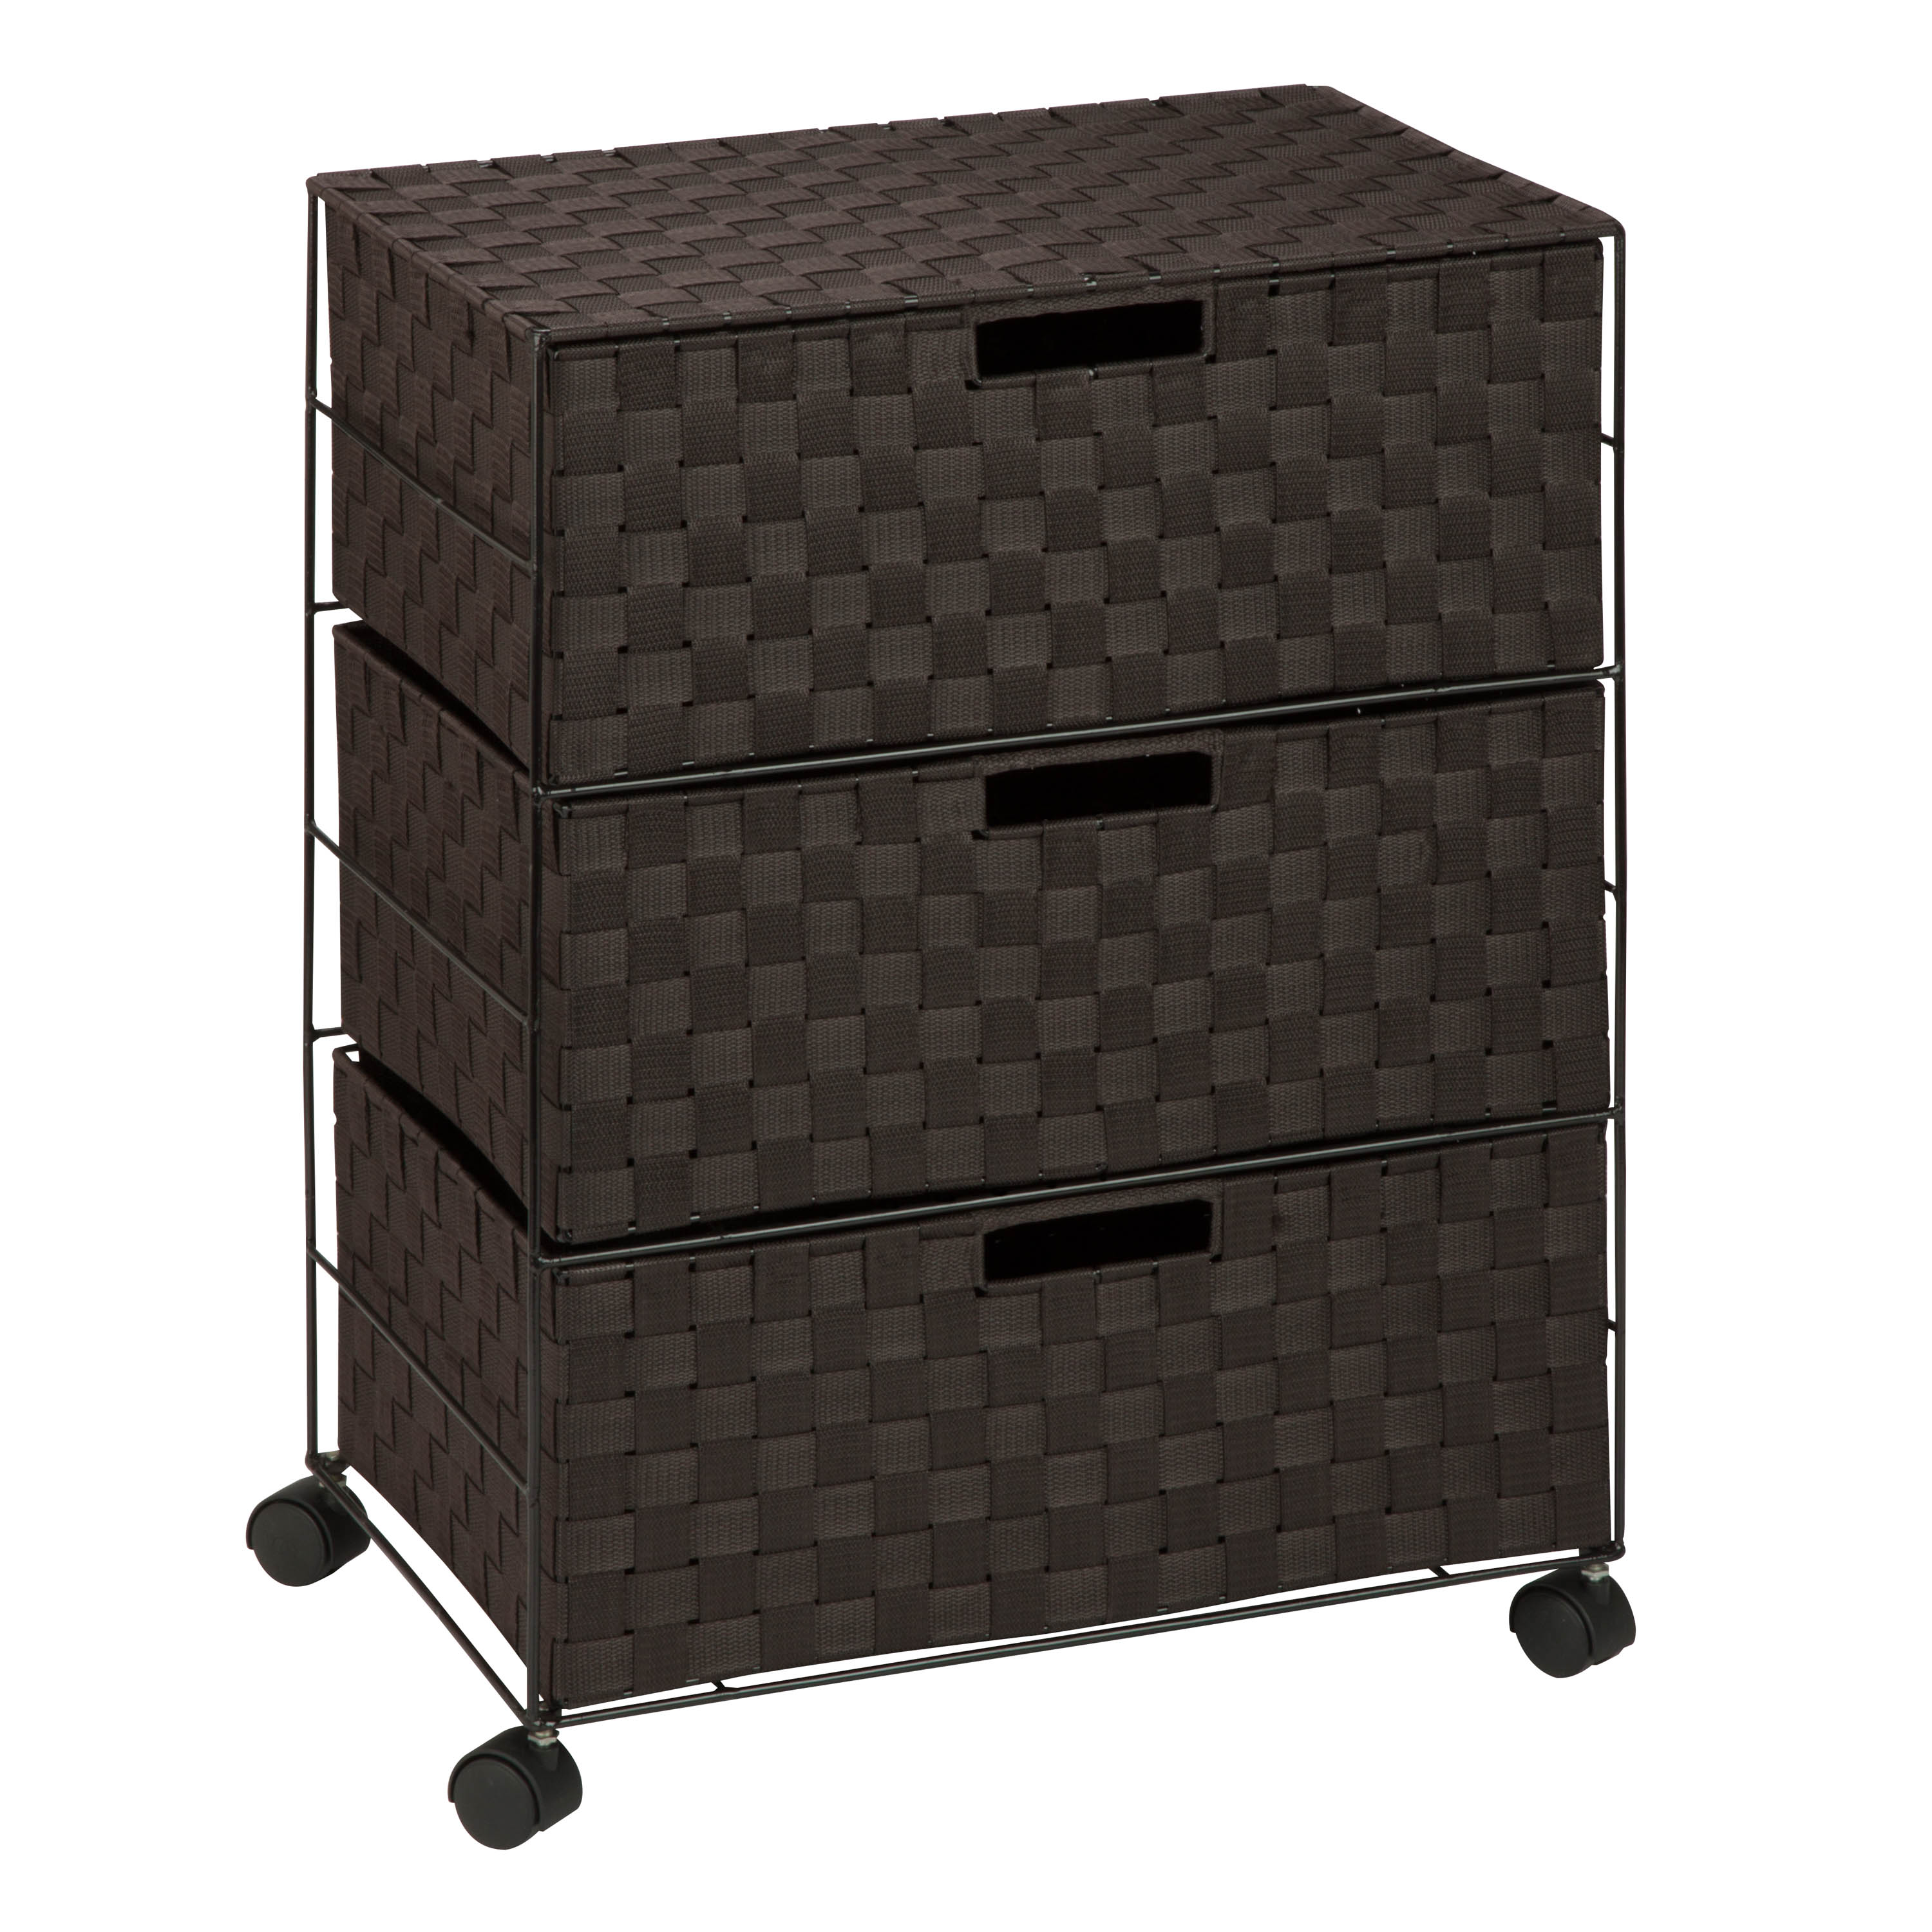 Honey-Can-Do Steel and Fabric Woven 3-Drawer Rolling Chest, Brown - image 1 of 2